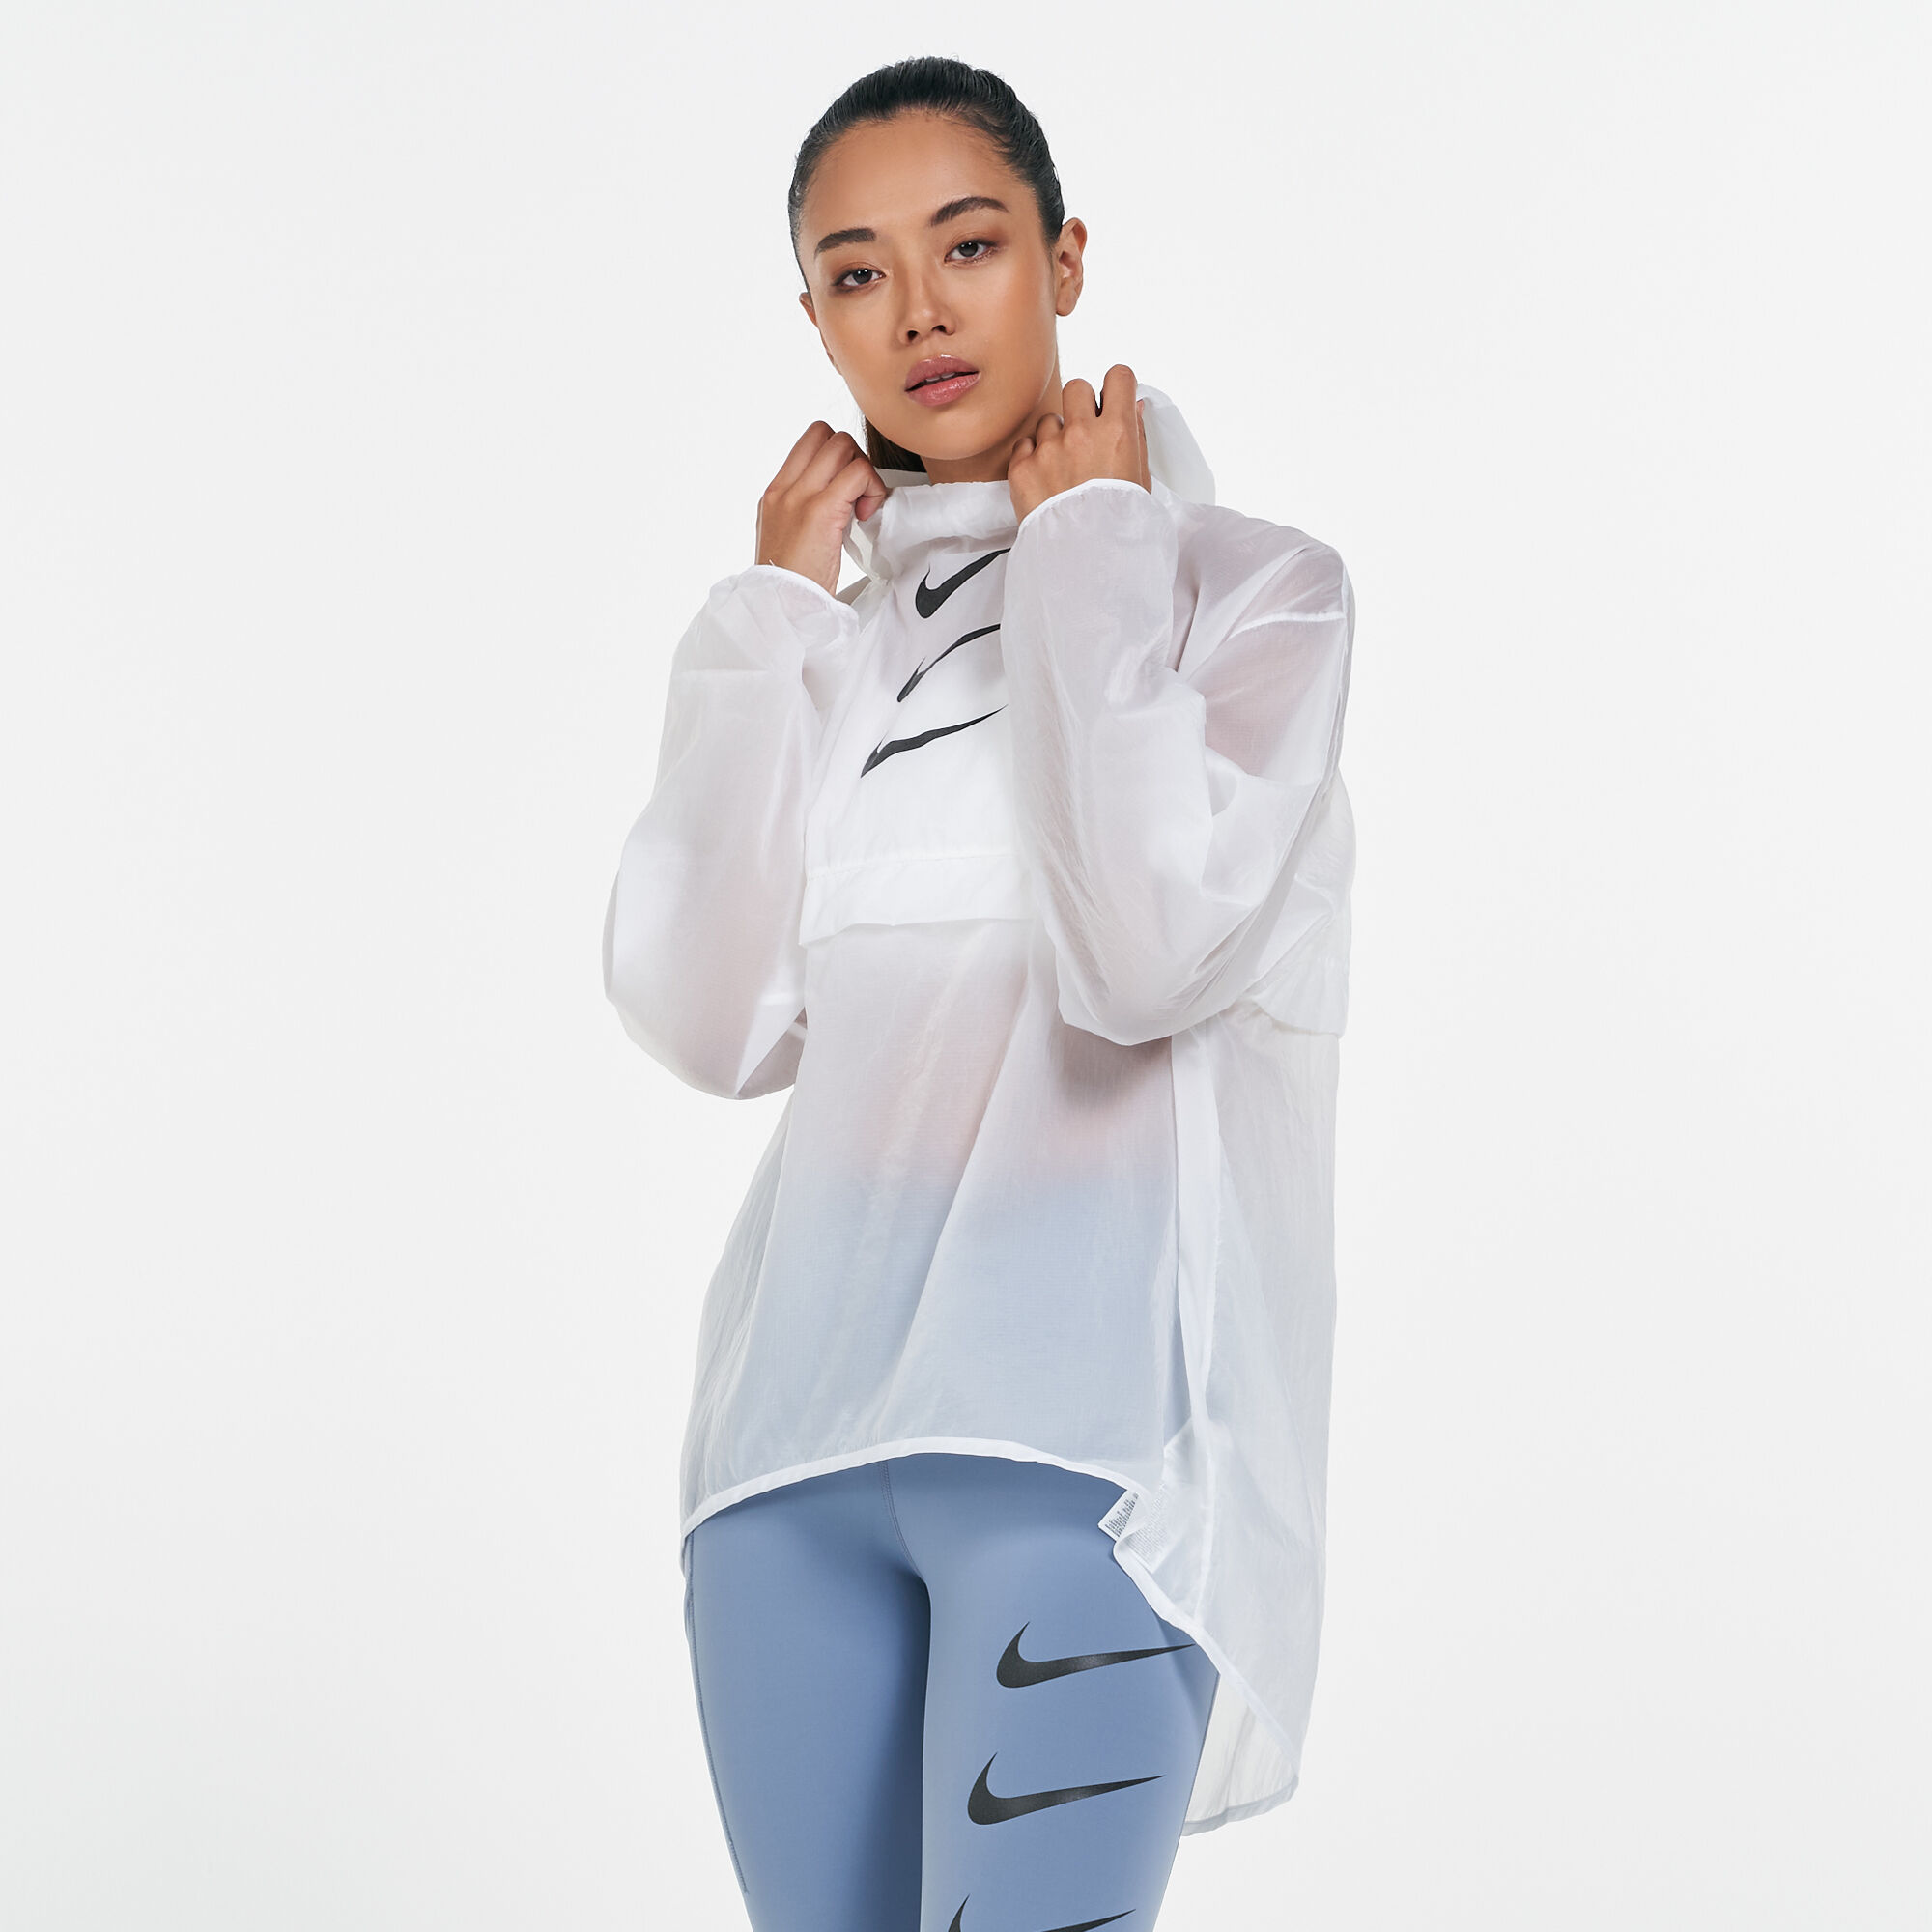 NIKE RUN DIVISION PACKABLE JACKET WOMENカラーブラック